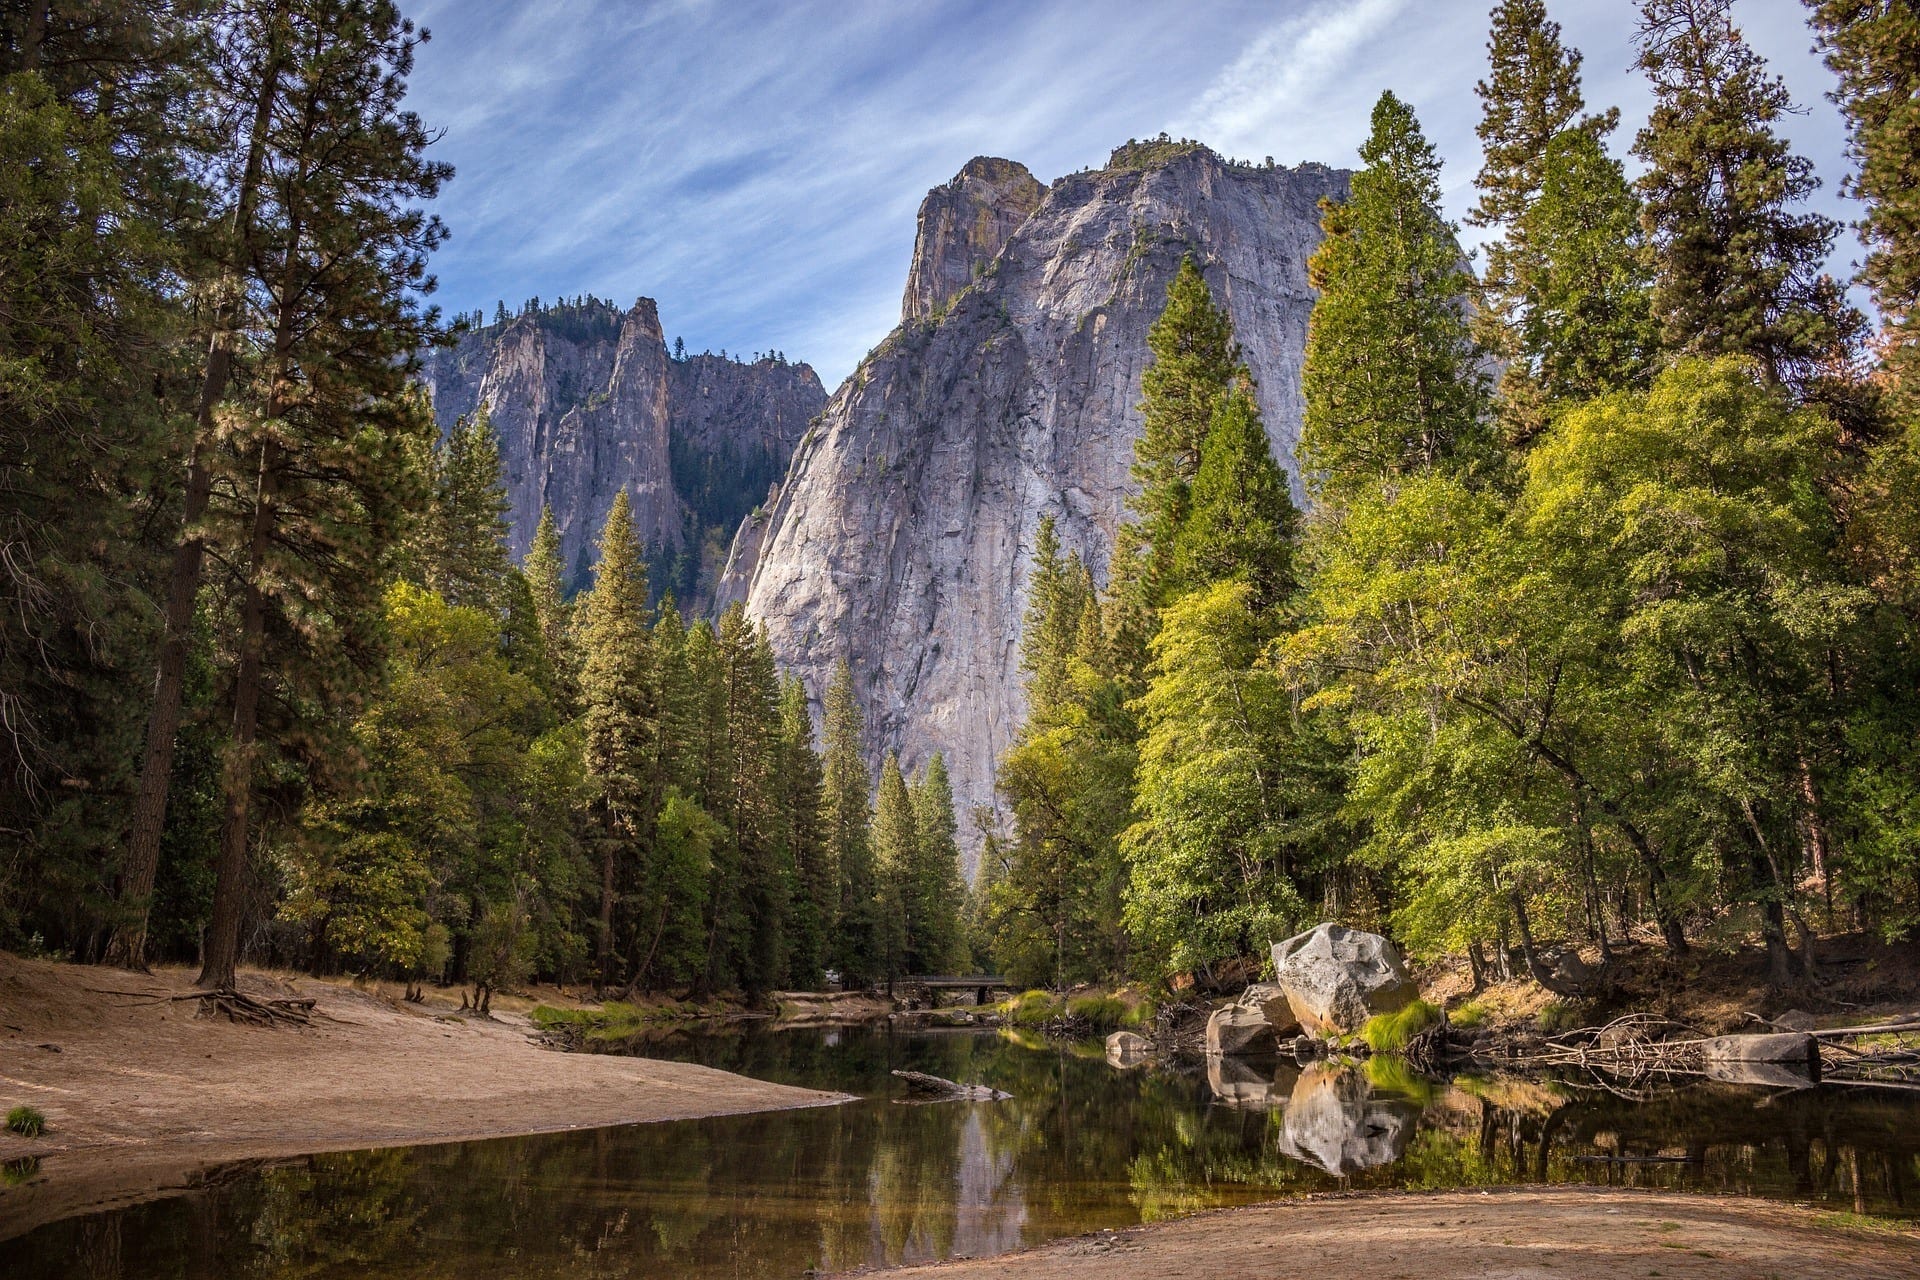 Yosemite National Park has huge looming mountains in the background underneath a blue and white streaky sky. There are bright green evergreen trees and water on the ground amongst the brown land.